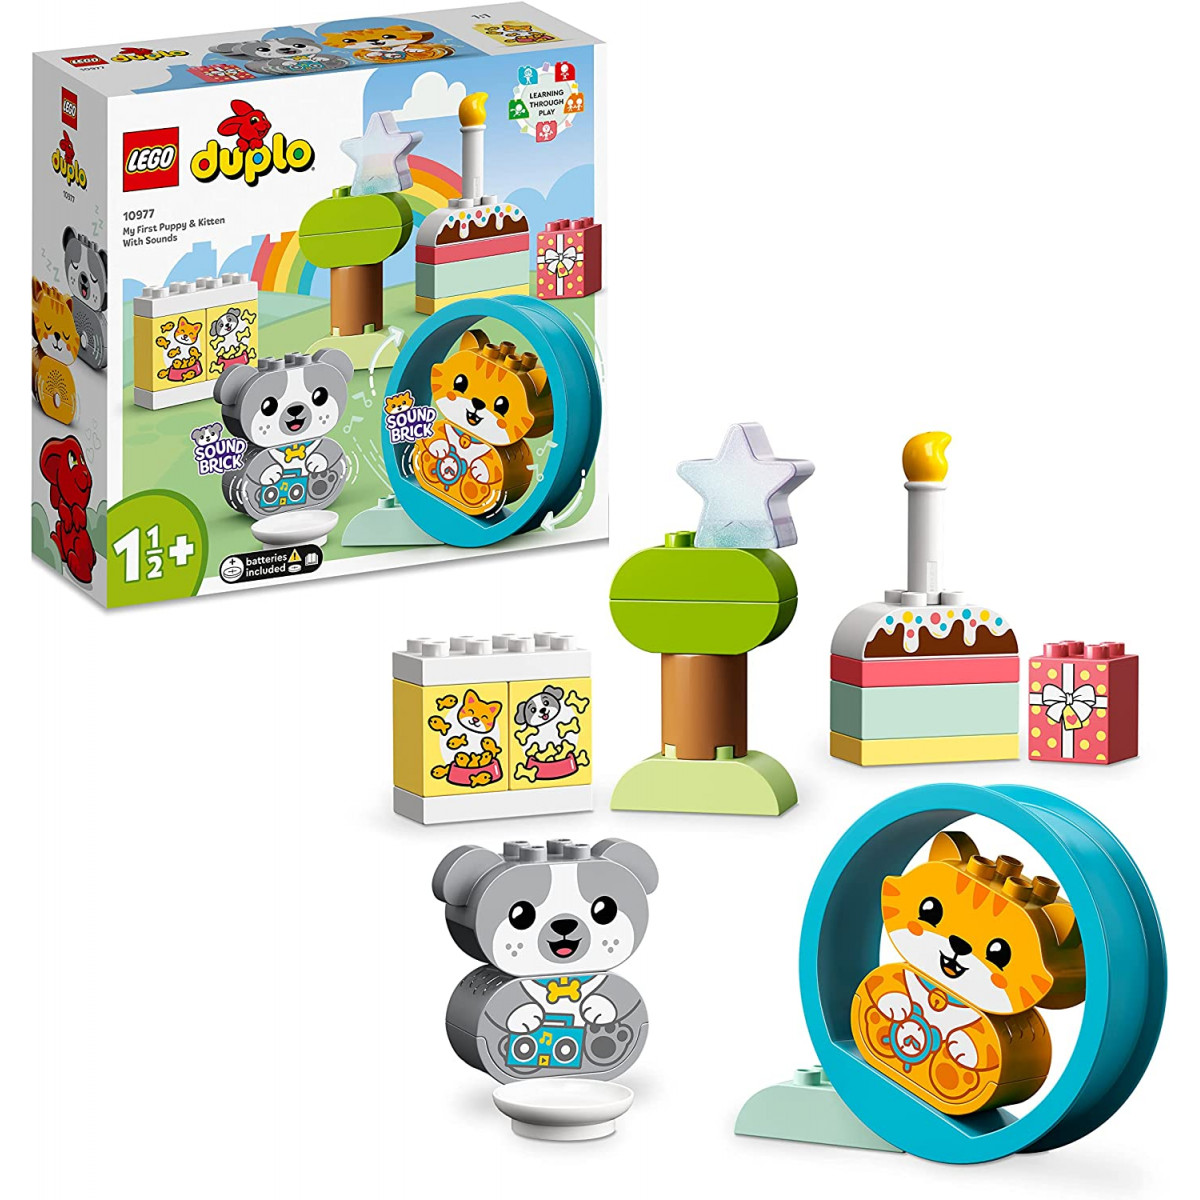 LEGO DUPLO 10977 - My First Puppy & Kitten with Sounds